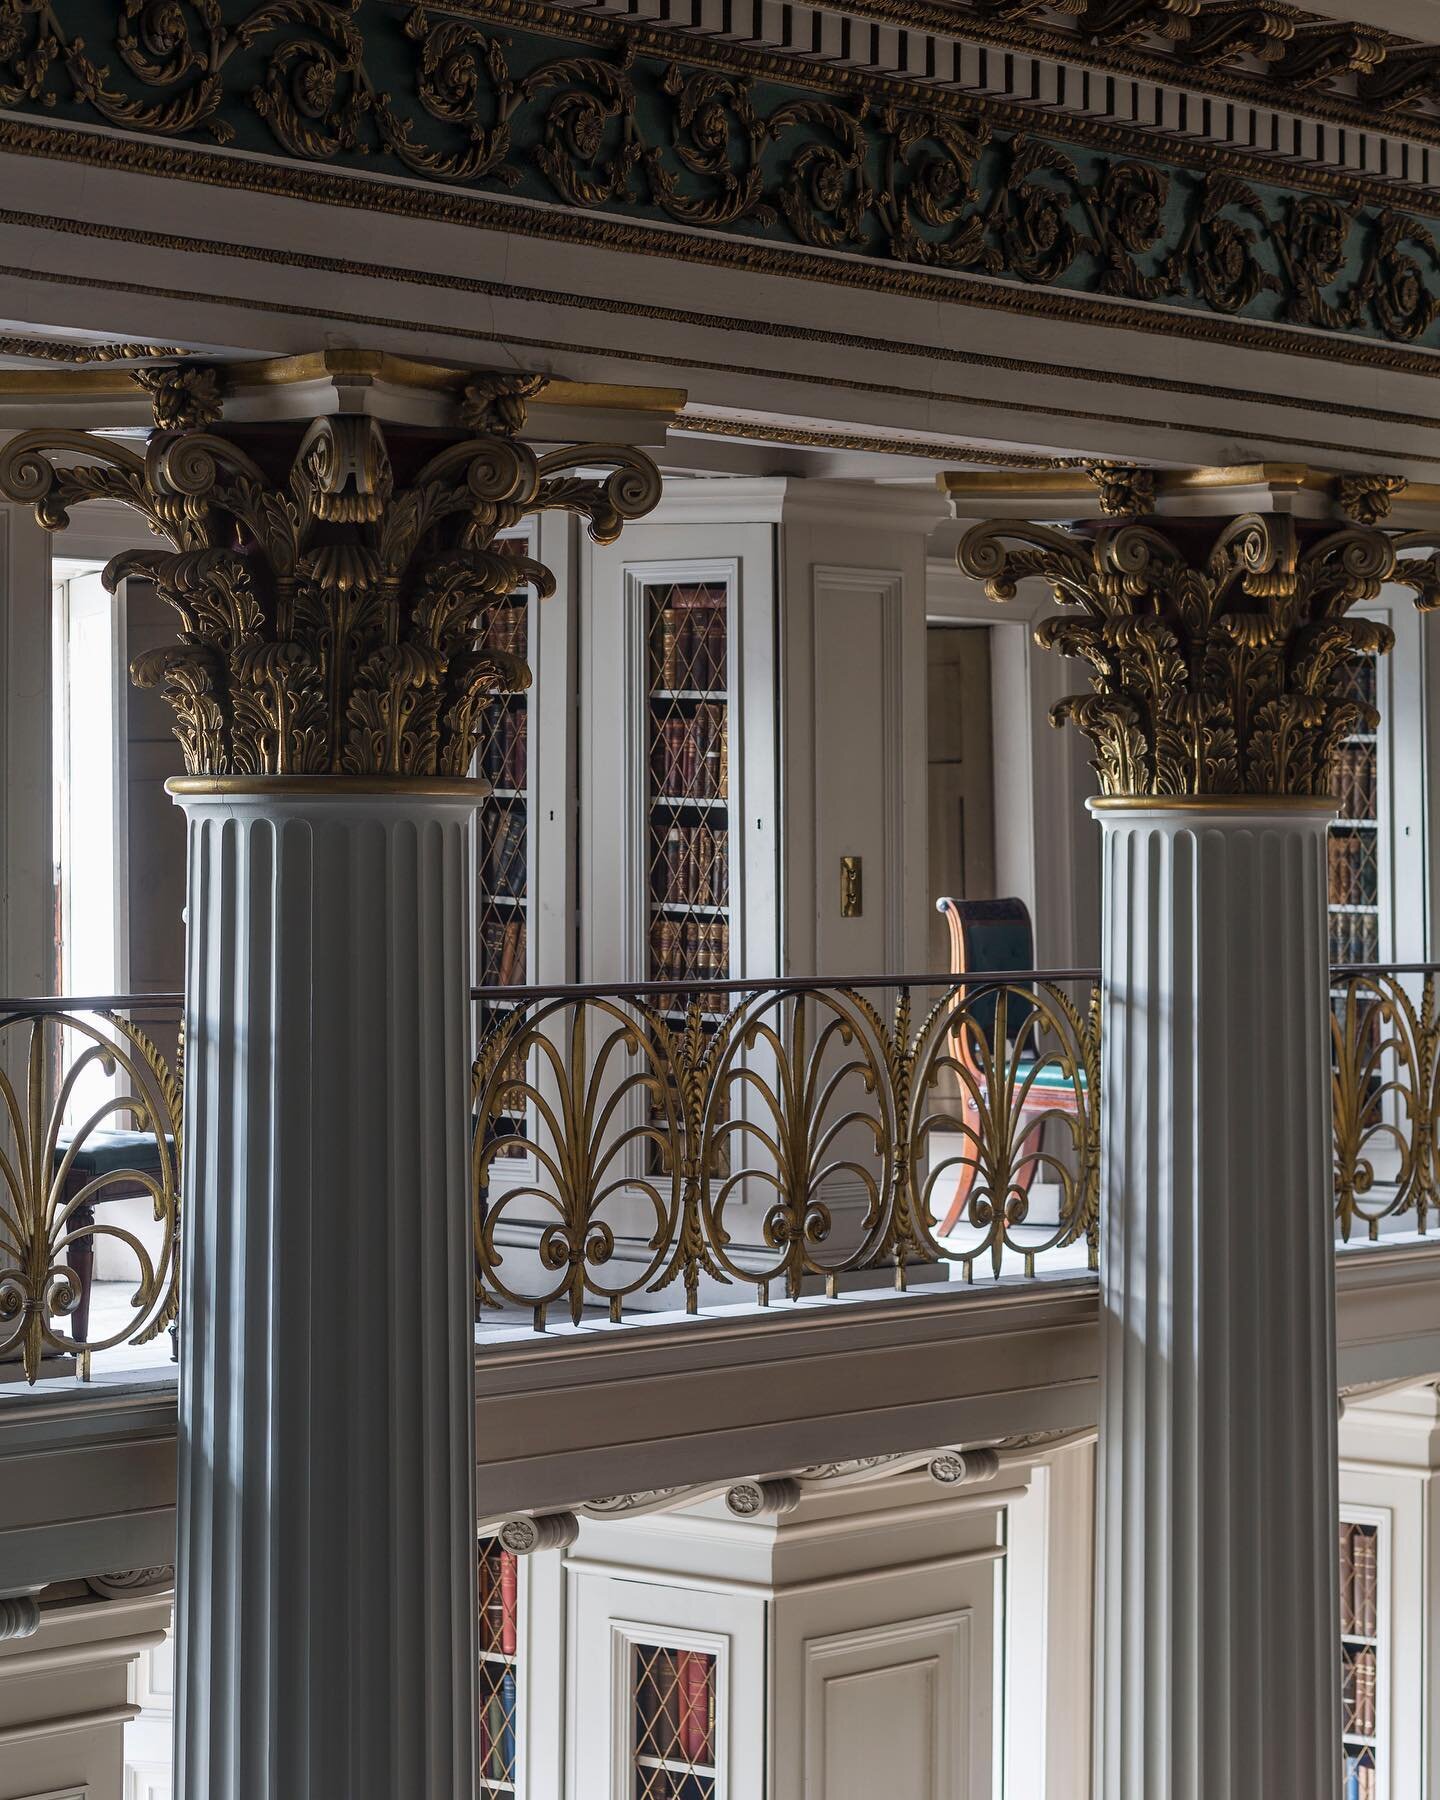 Today is World Heritage Day and what better day to celebrate the magnificent neo-classical architecture of the Signet Library, owned and operated by the WS Society (Scottish charity SC050987). The Signet Library was constructed and furnished during t